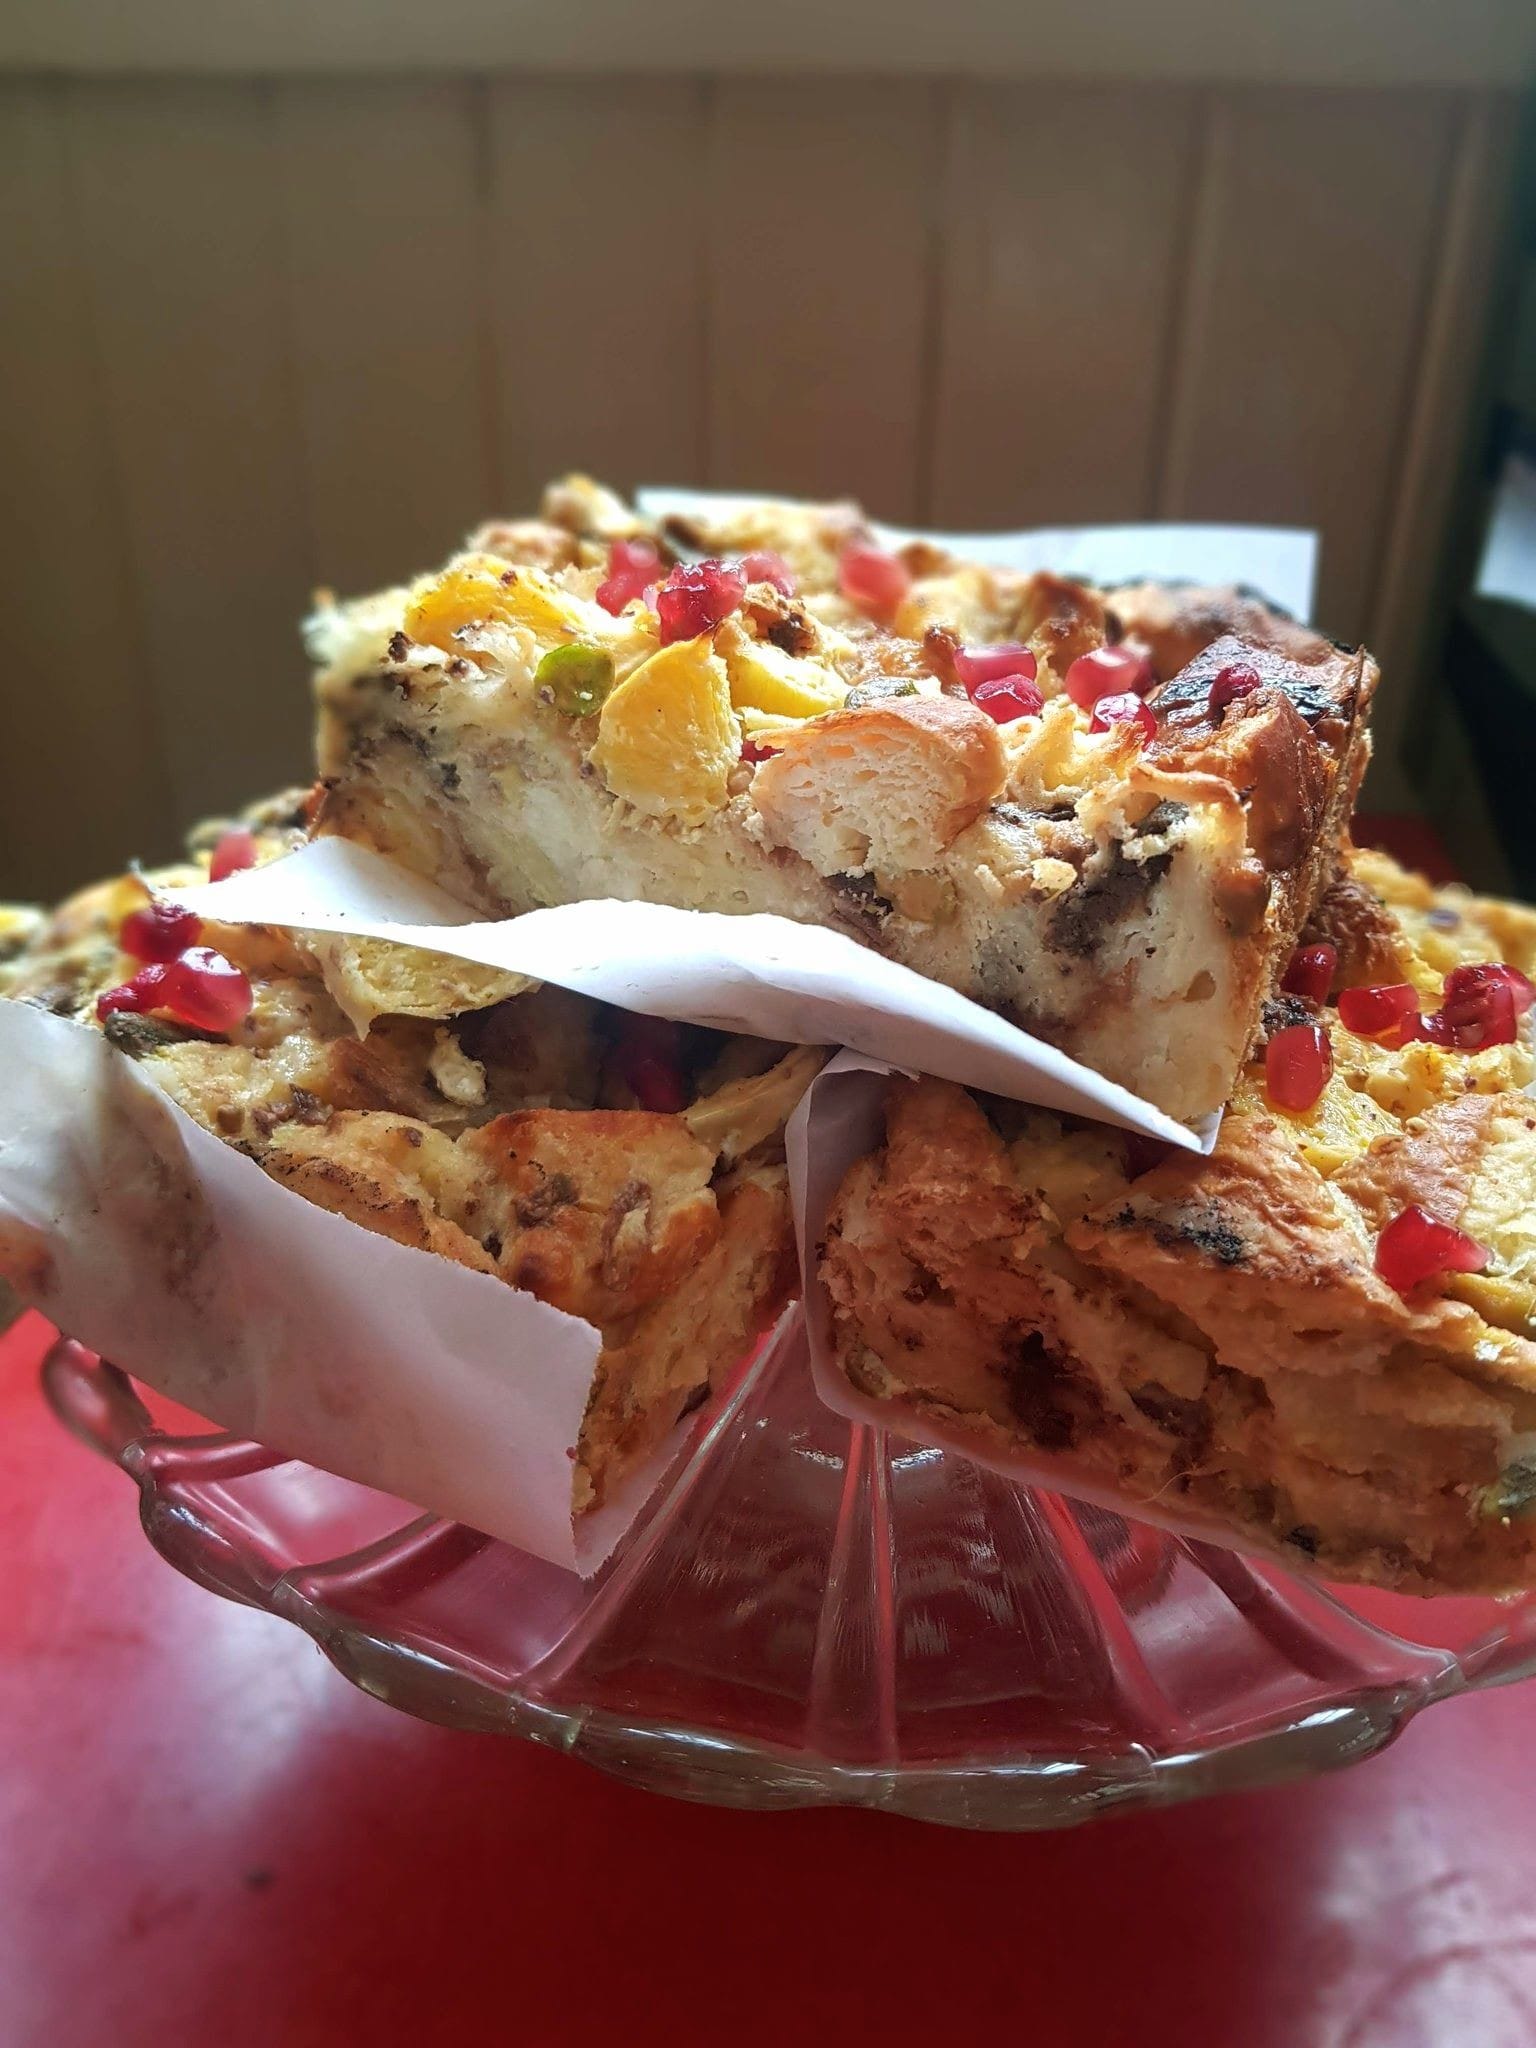 A glass cake stand loaded with large slices of bread and butter pudding